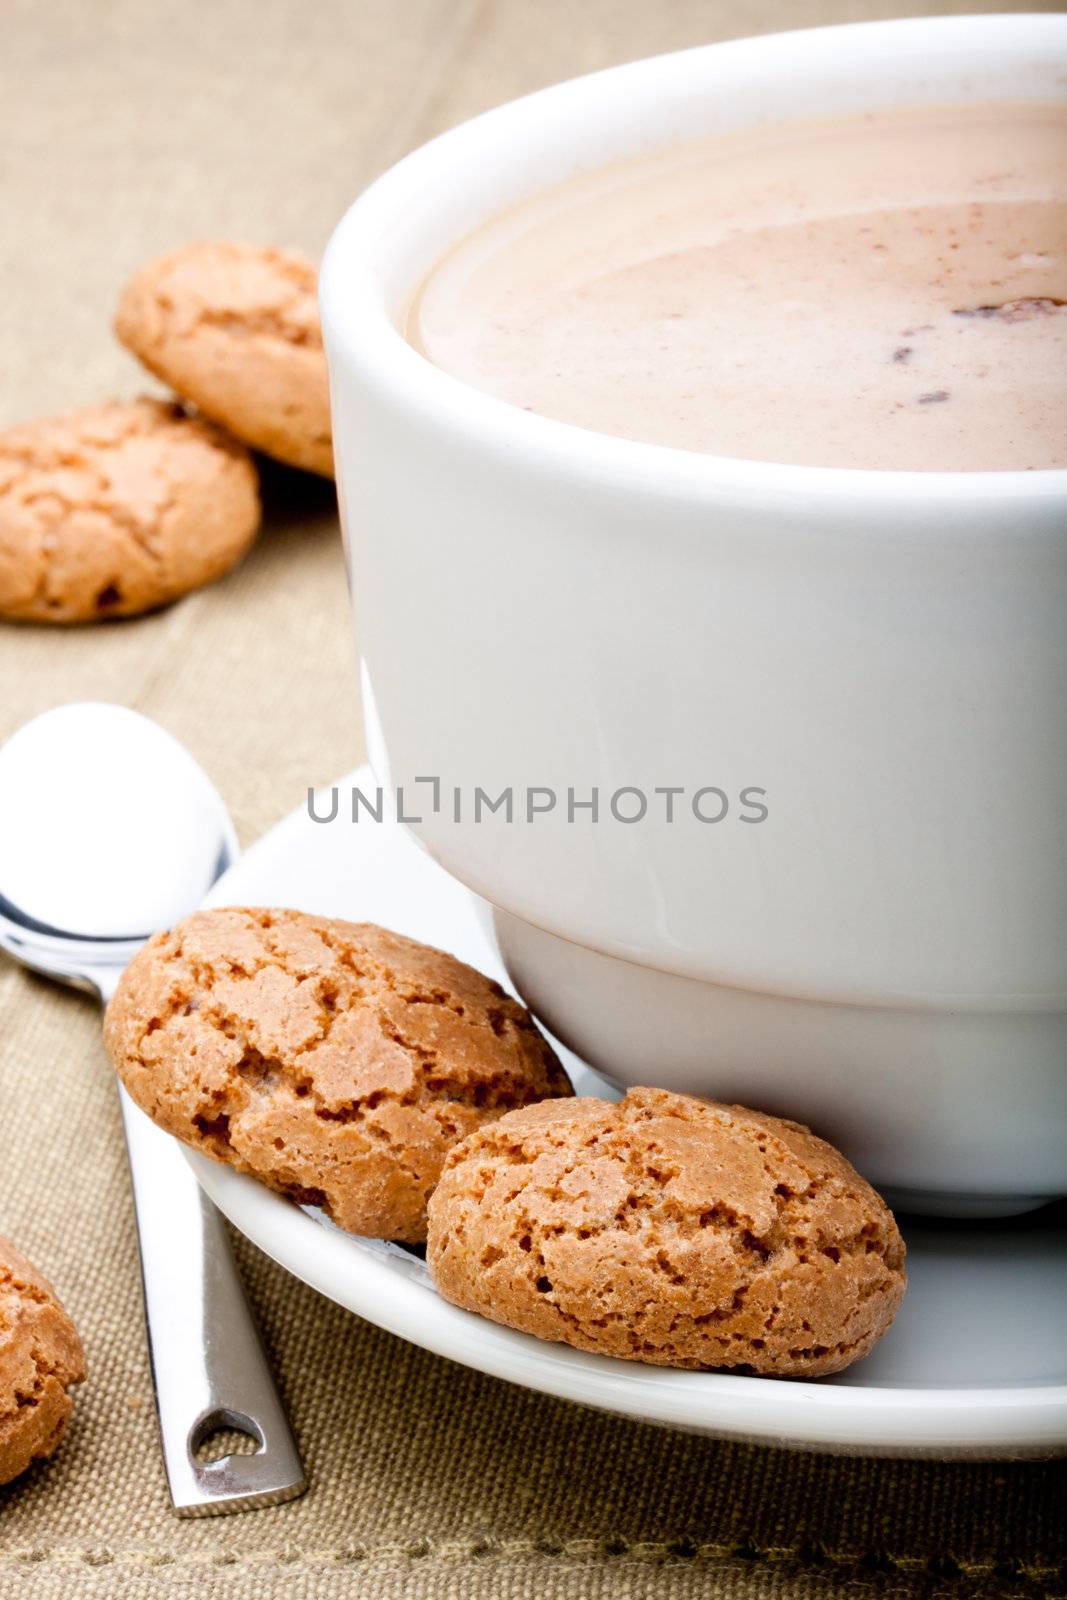 amaretti biscuits and cappuccino by maxg71